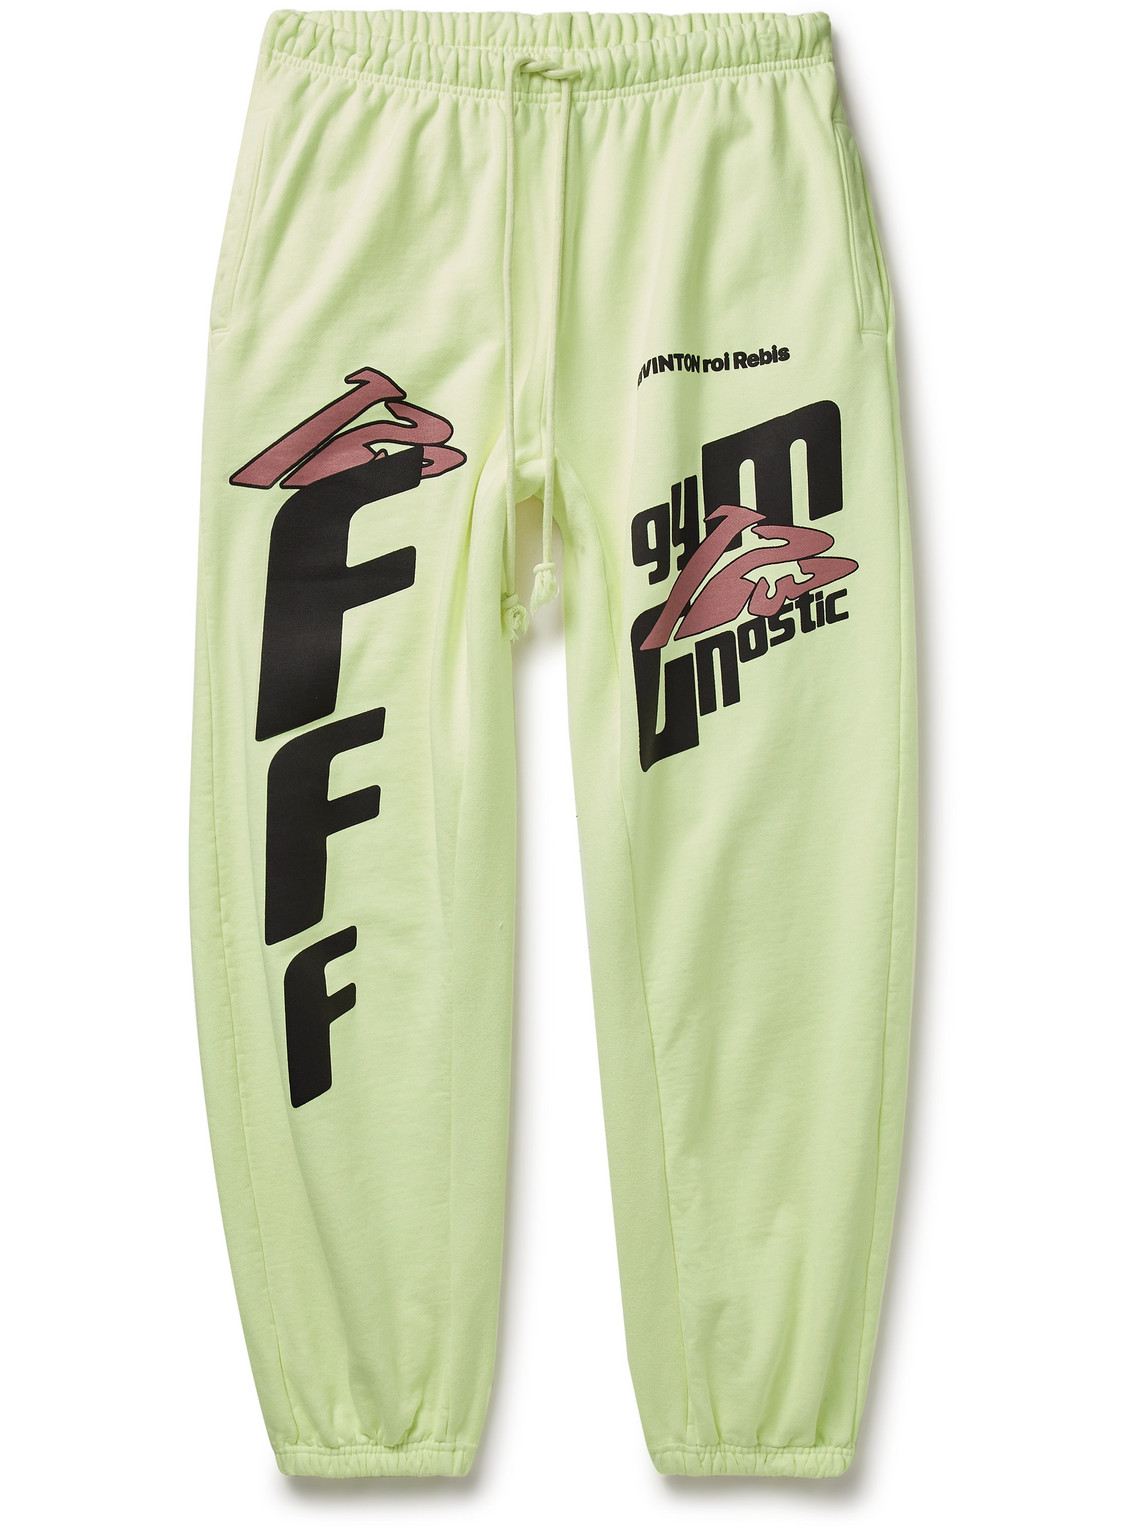 RRR123 - Fasting for Faster Tapered Printed Cotton-Jersey Sweatpants - Men - Green - 1 von RRR123